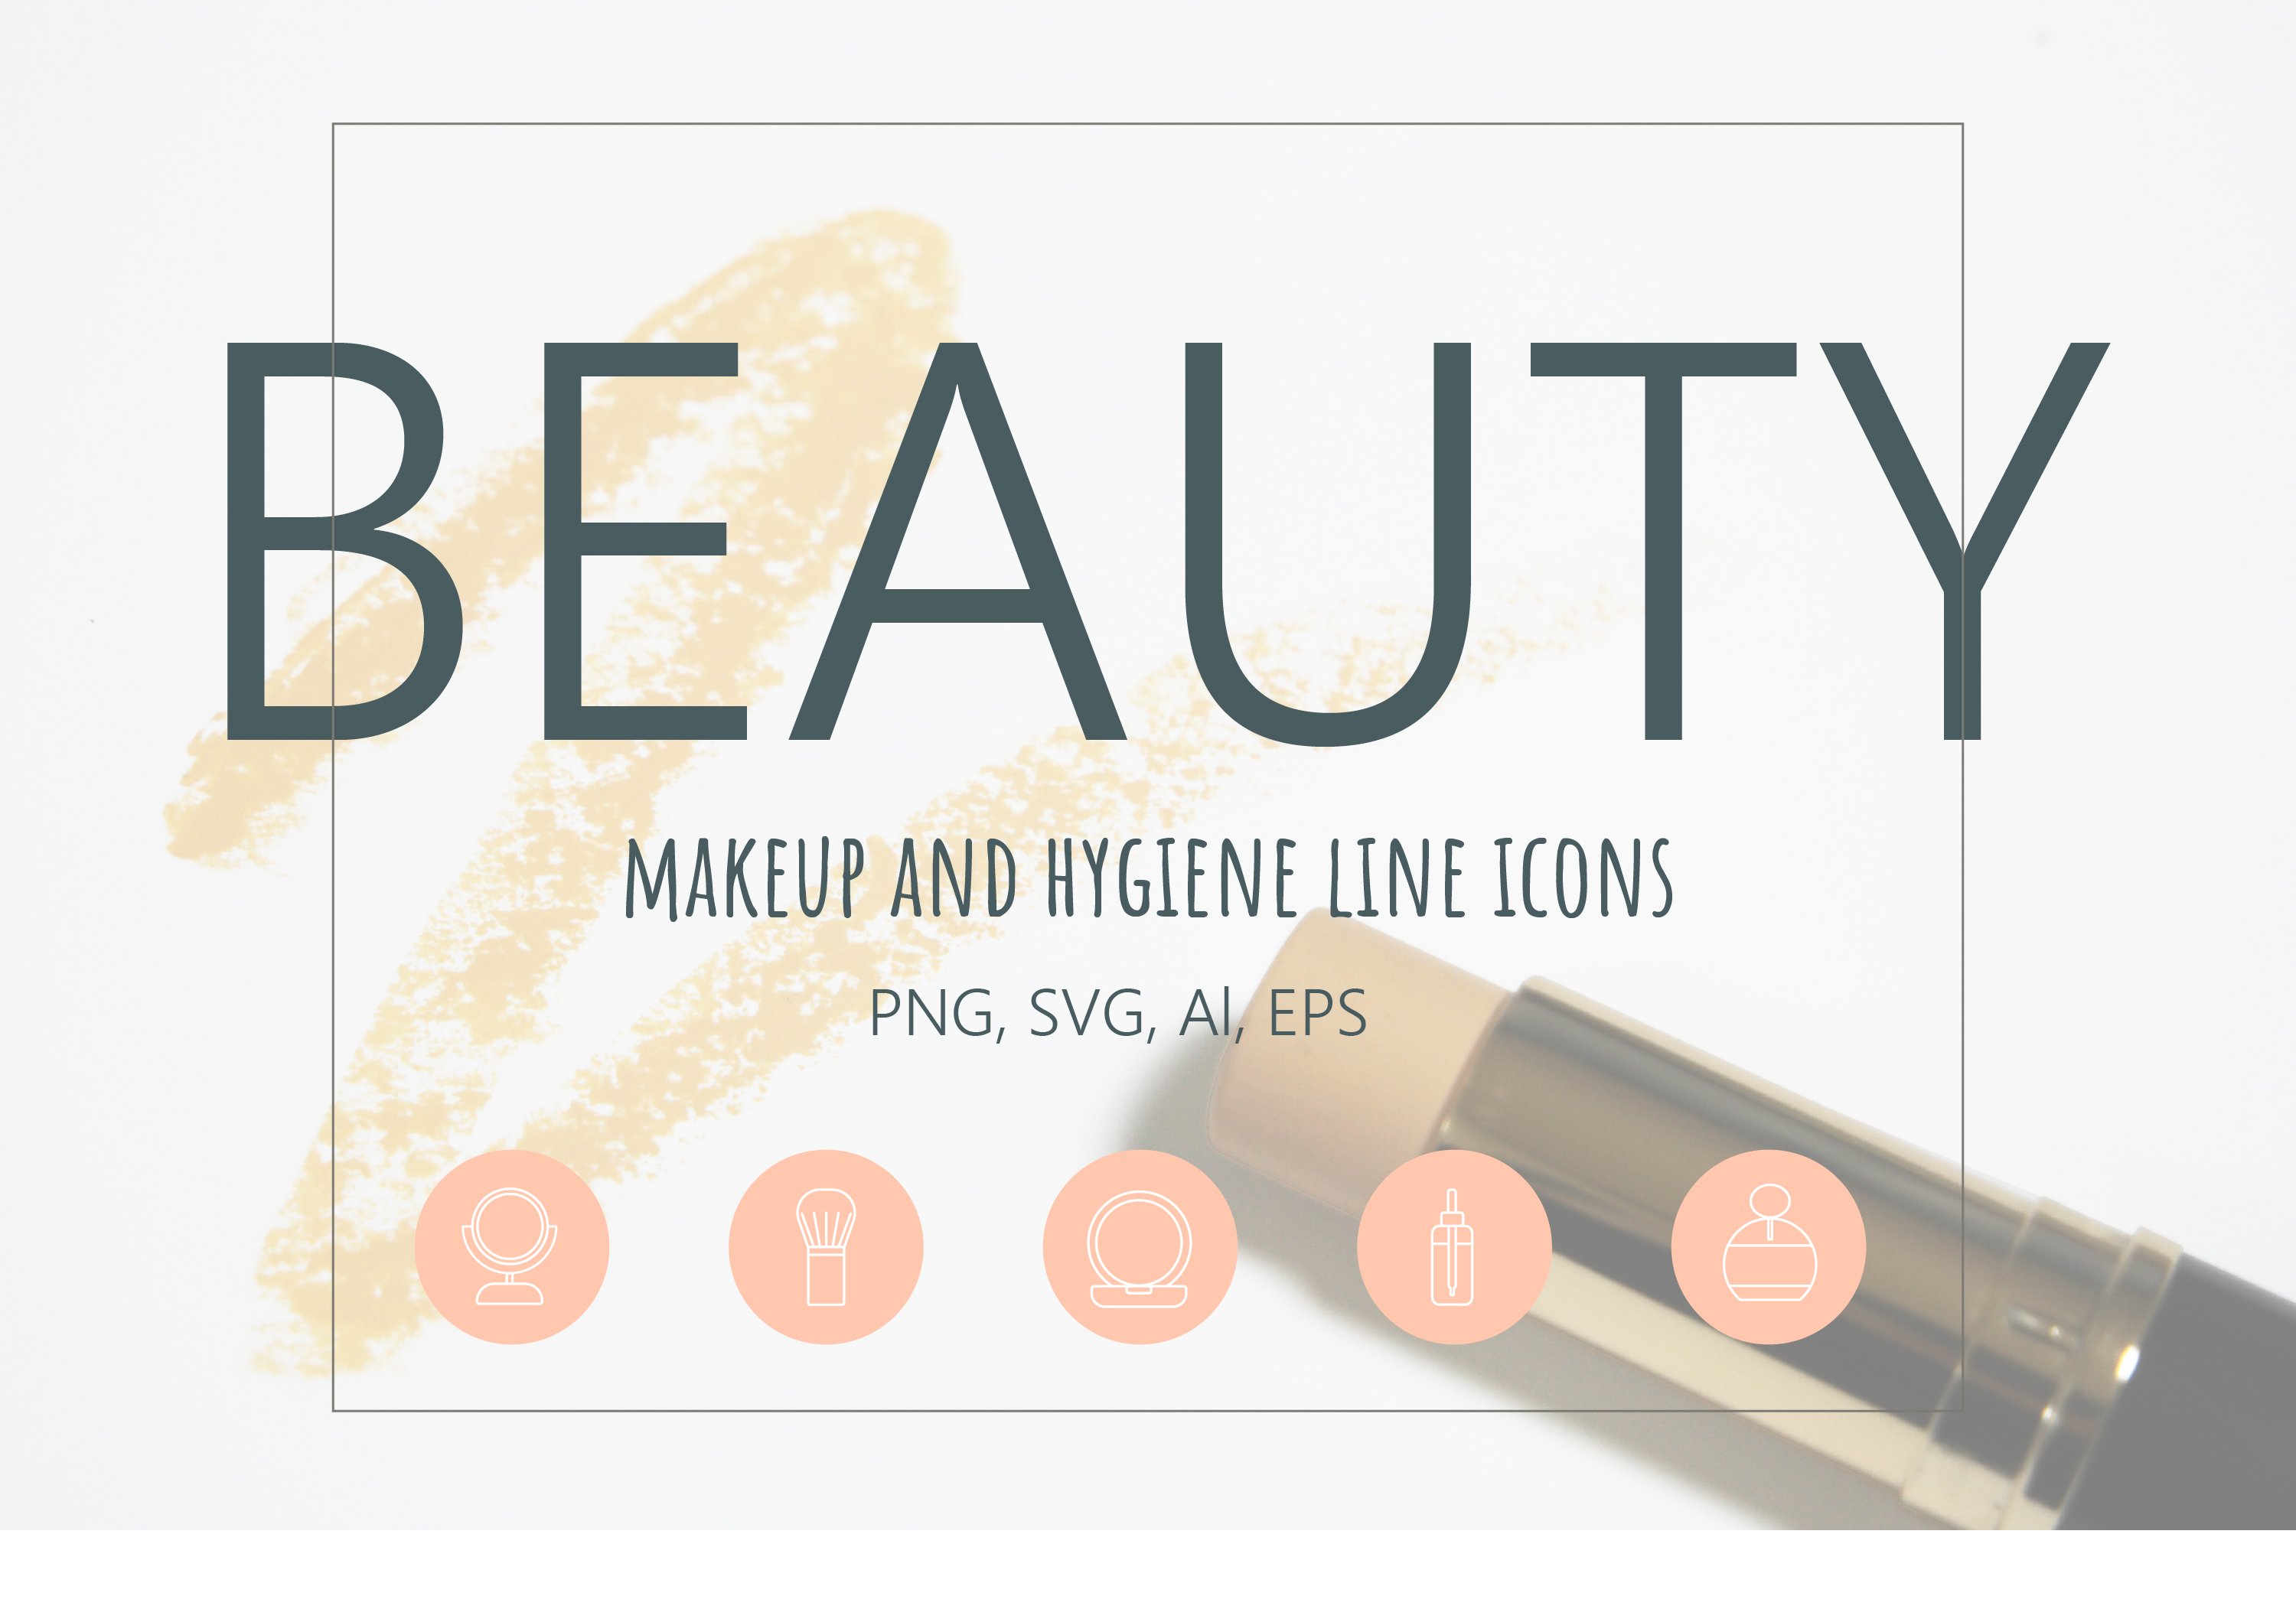 Beauty - Makeup & Hygiene line icons cover image.